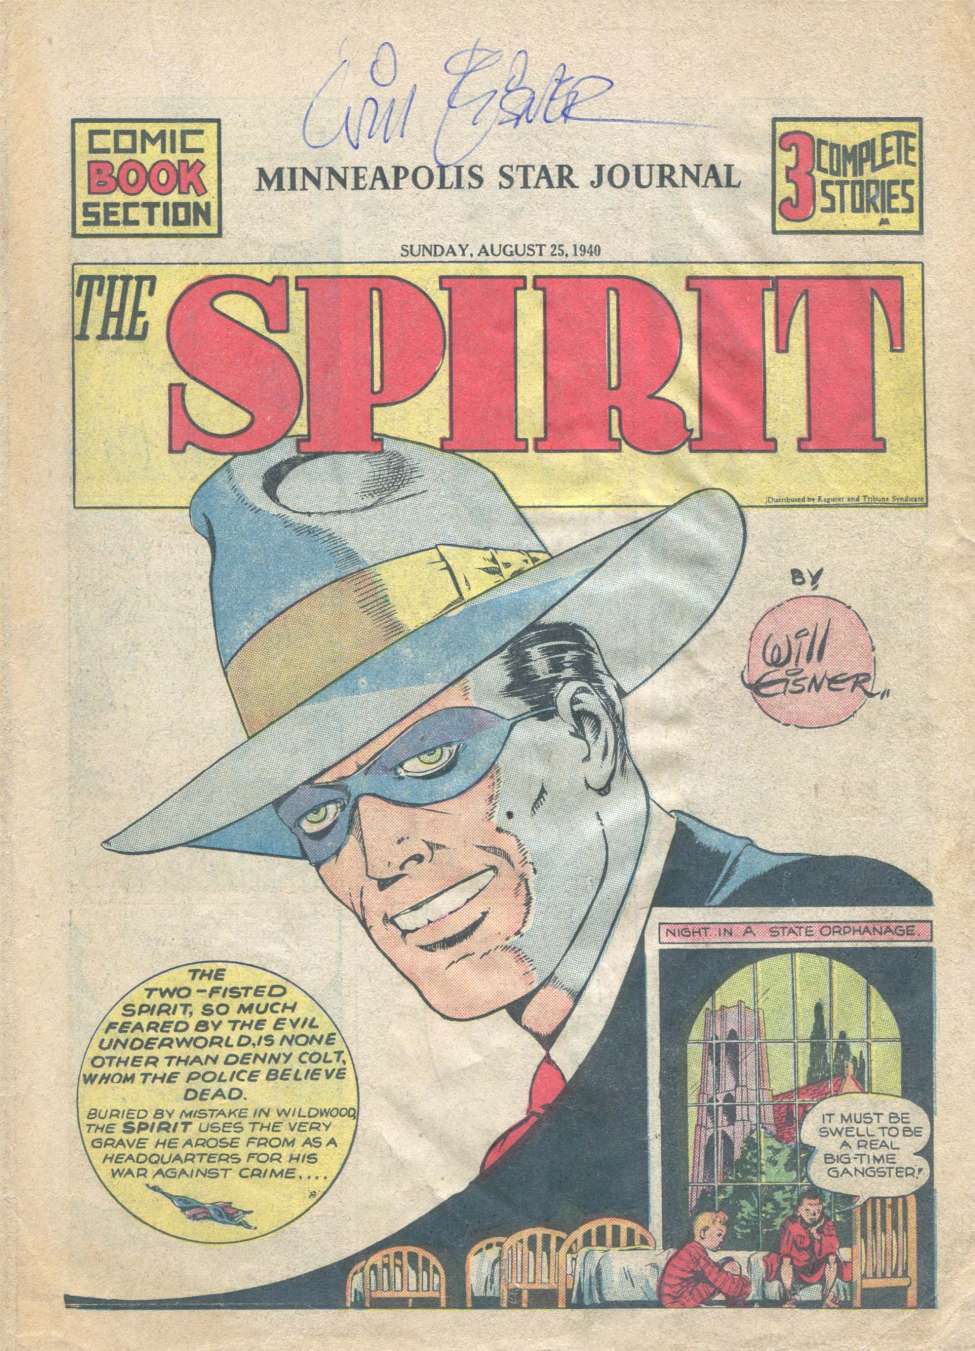 Book Cover For The Spirit (1940-08-25) - Minneapolis Star Journal